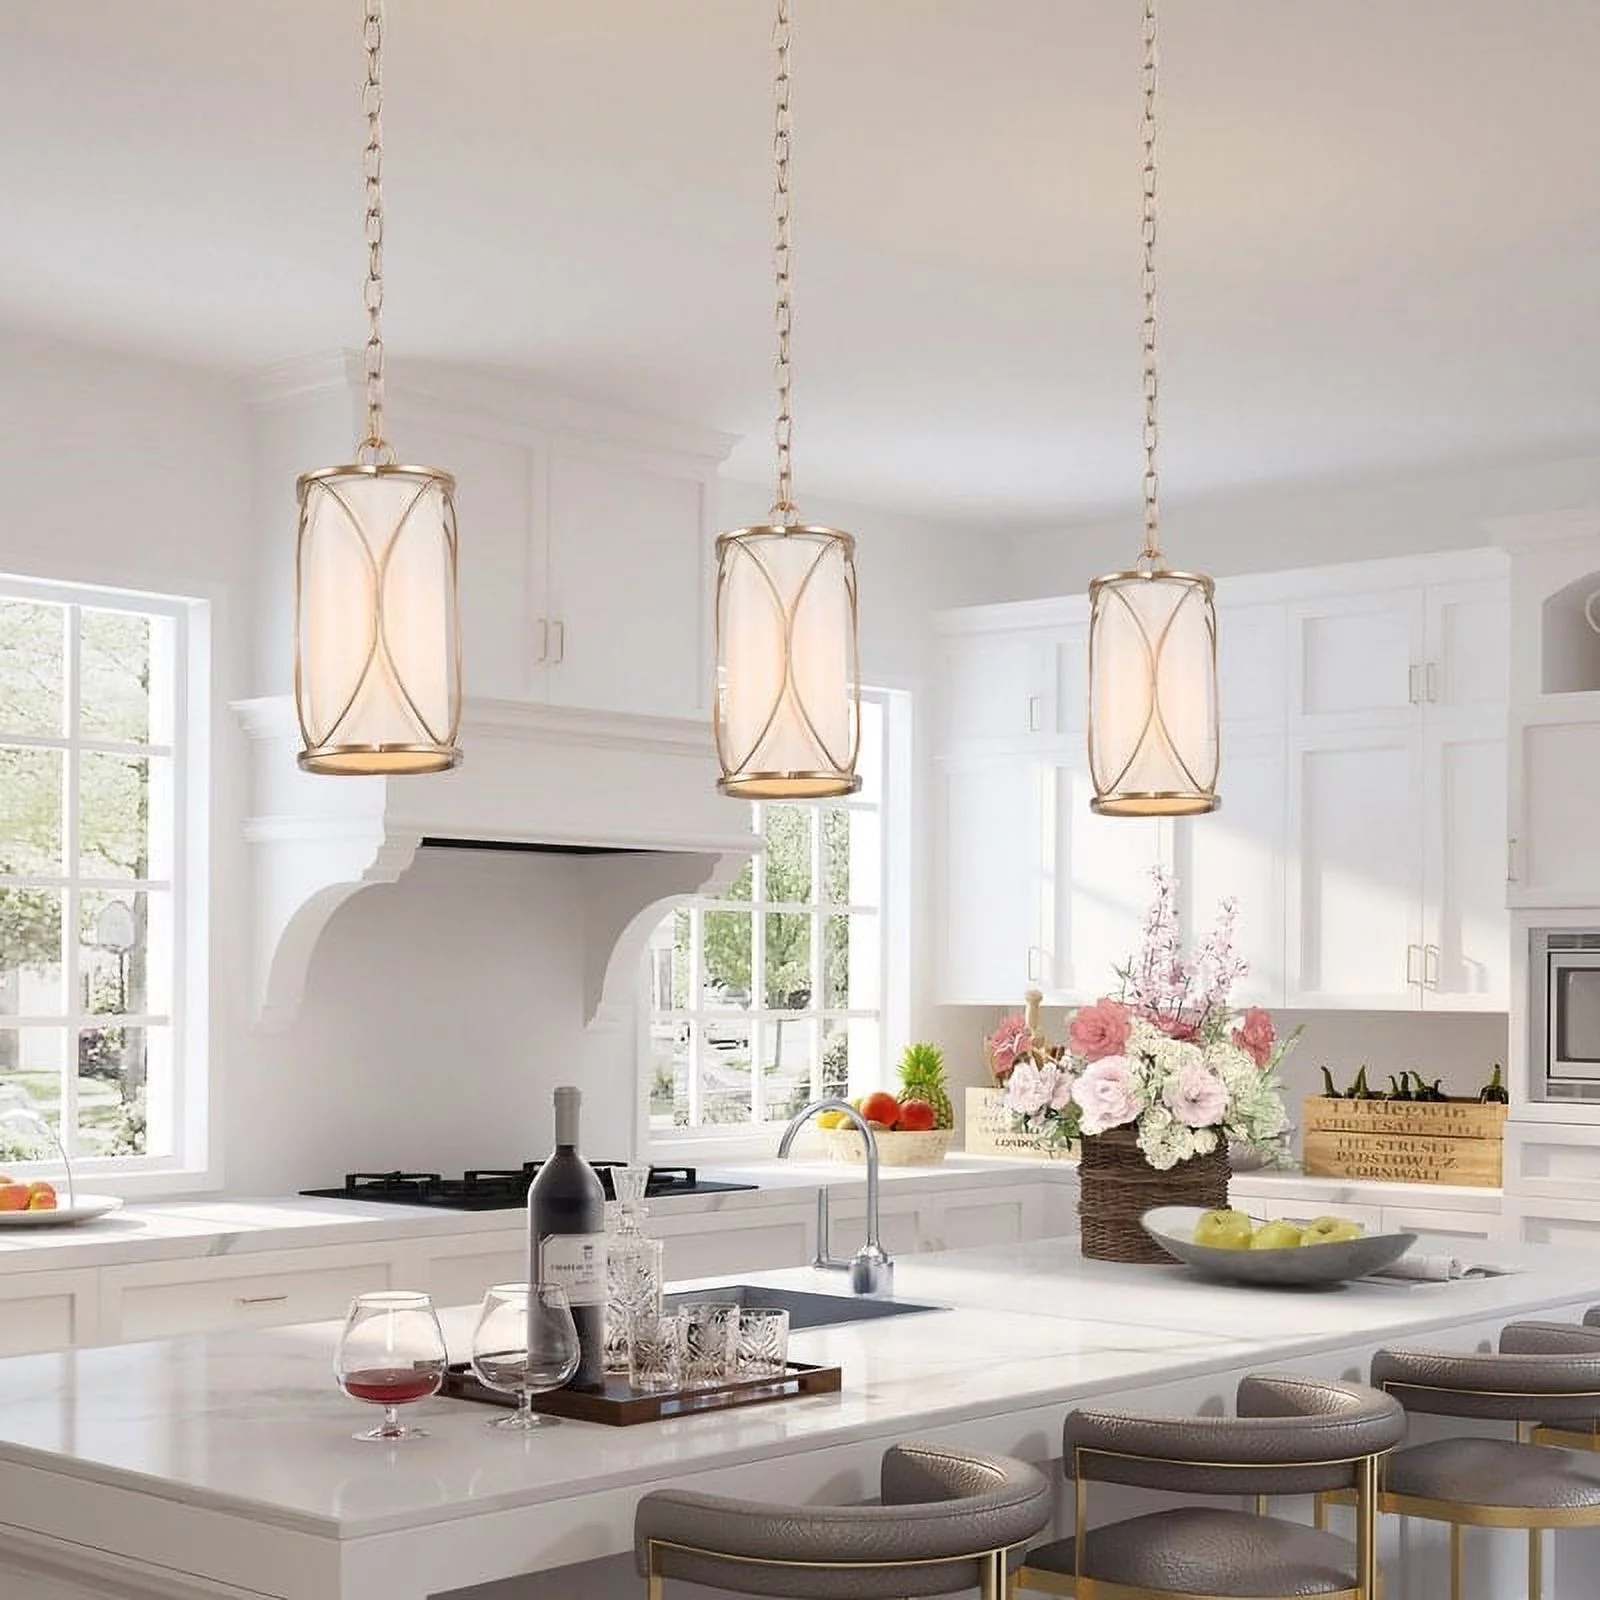 white kitchen with gold pendant lighting your perfect kitchen island